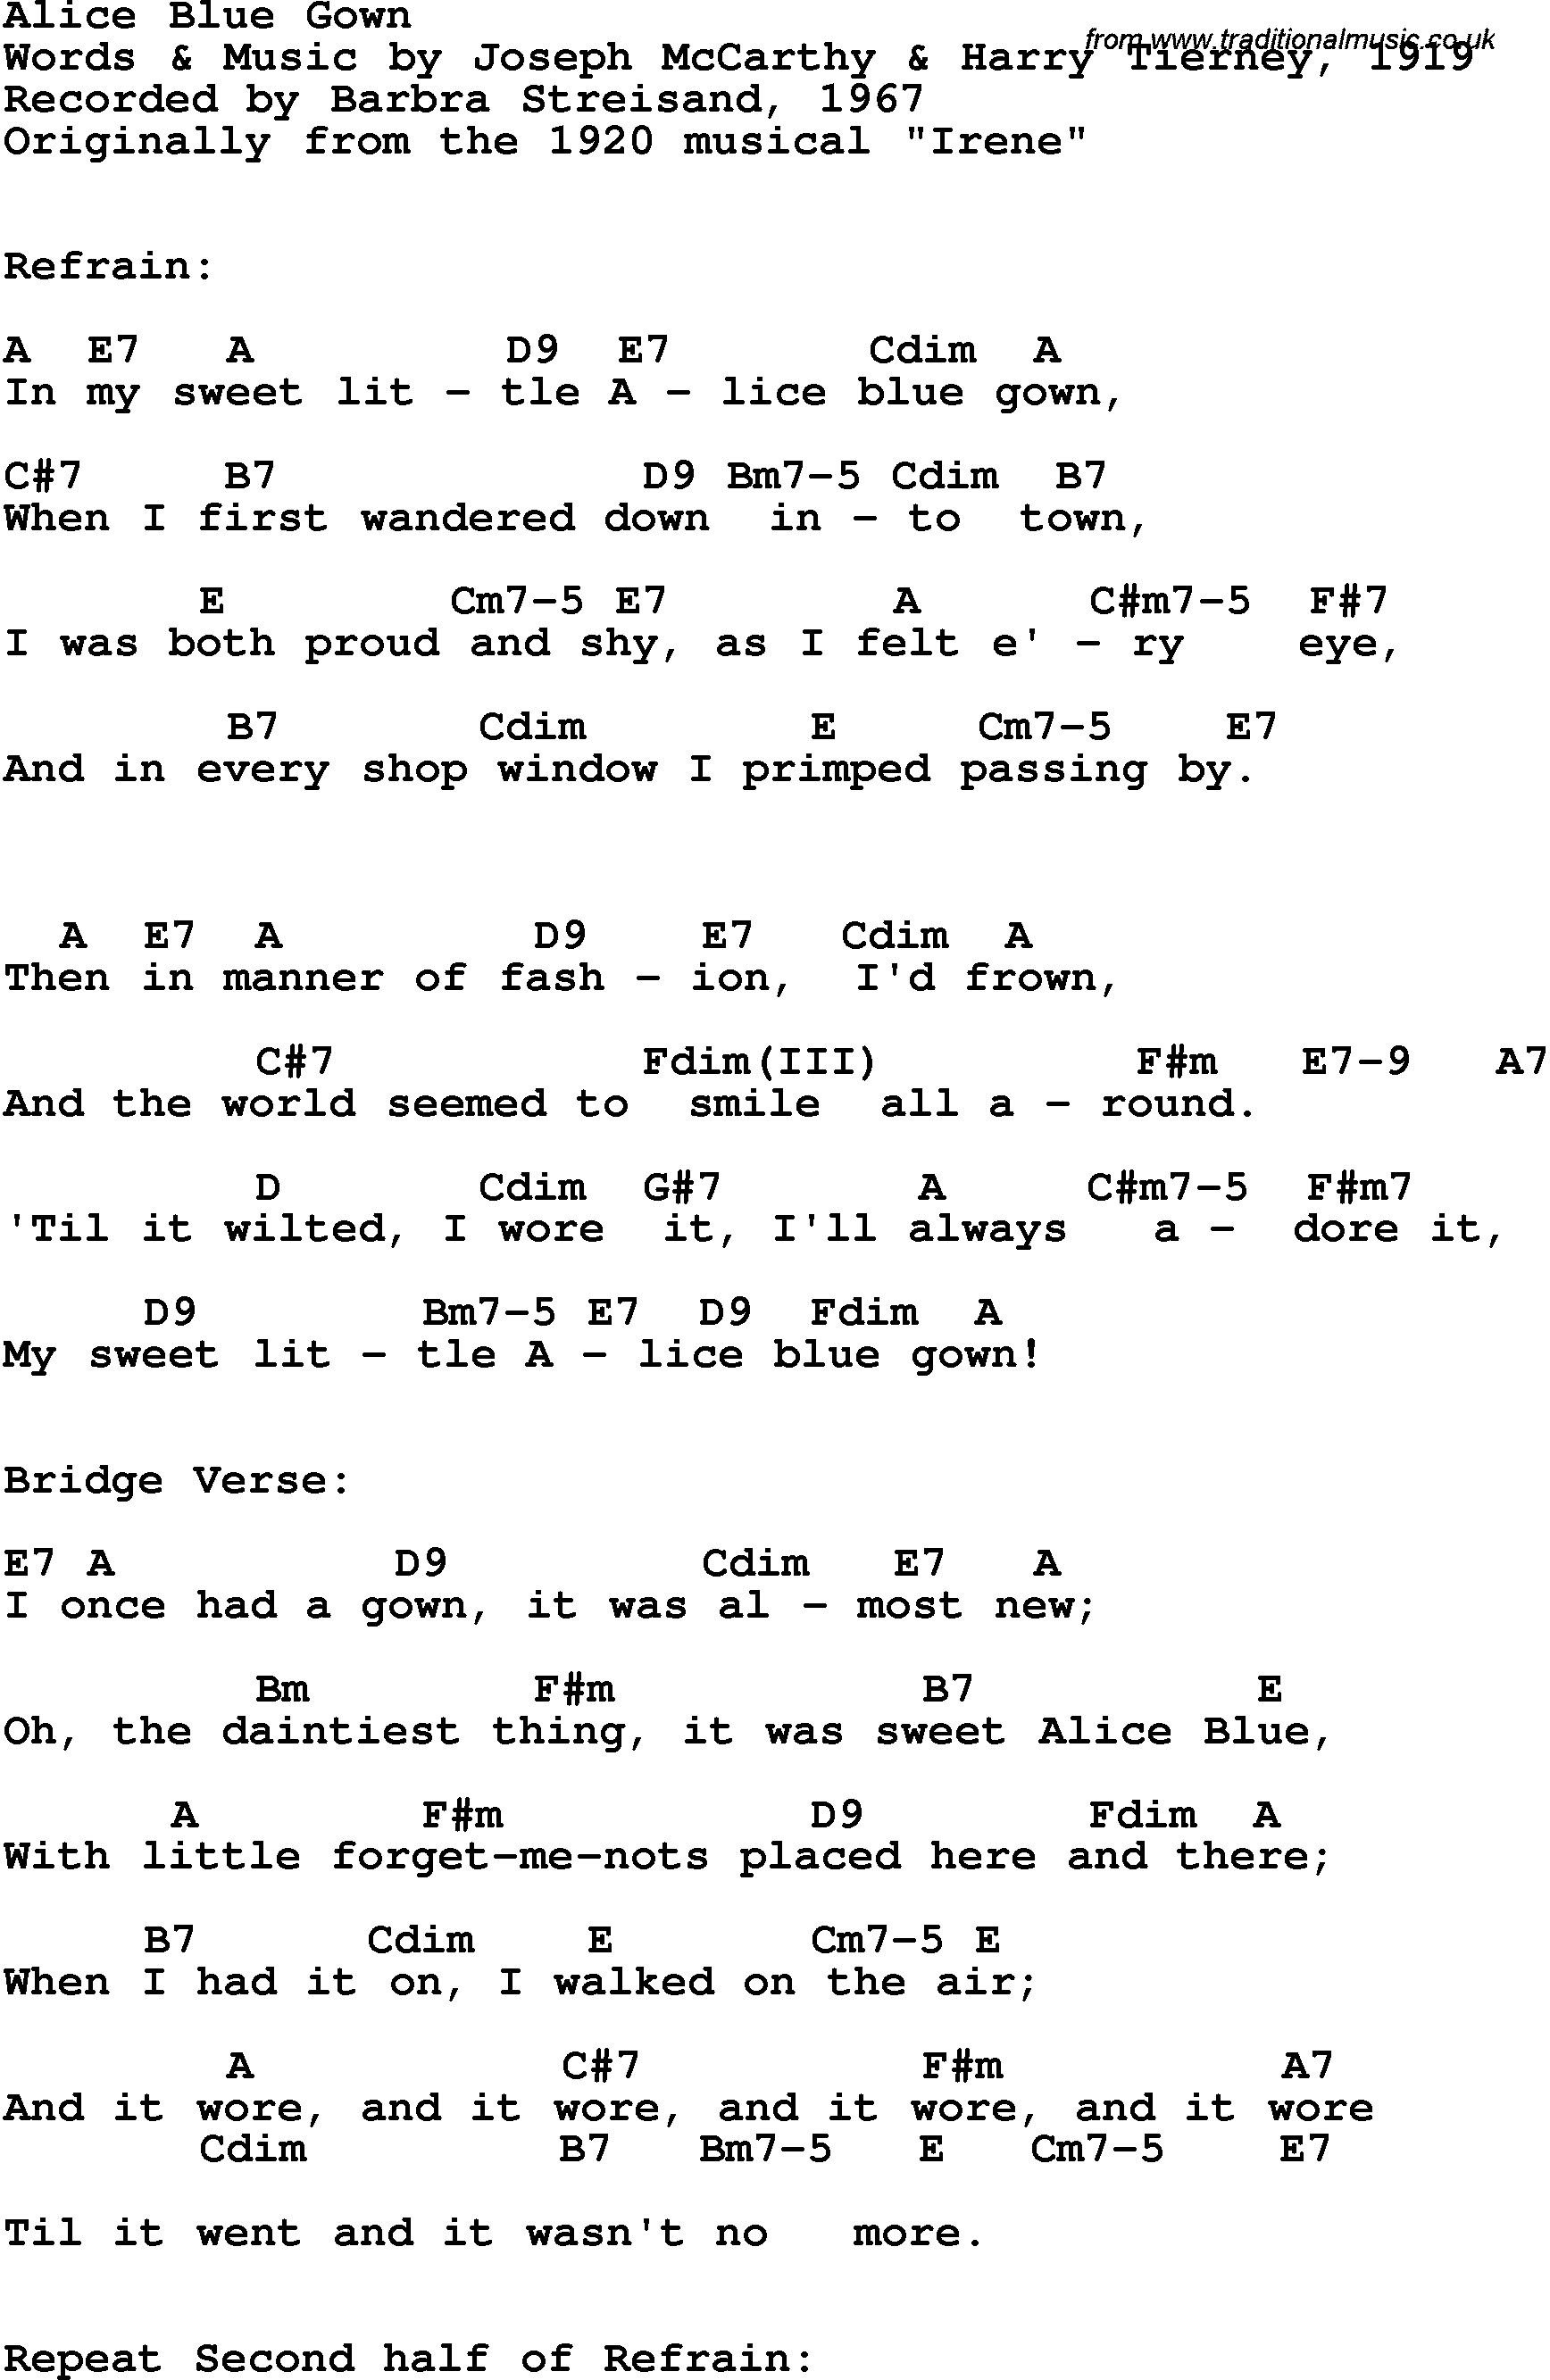 Song Lyrics with guitar chords for Alice Blue Gown - Barbra Steisand, 1967